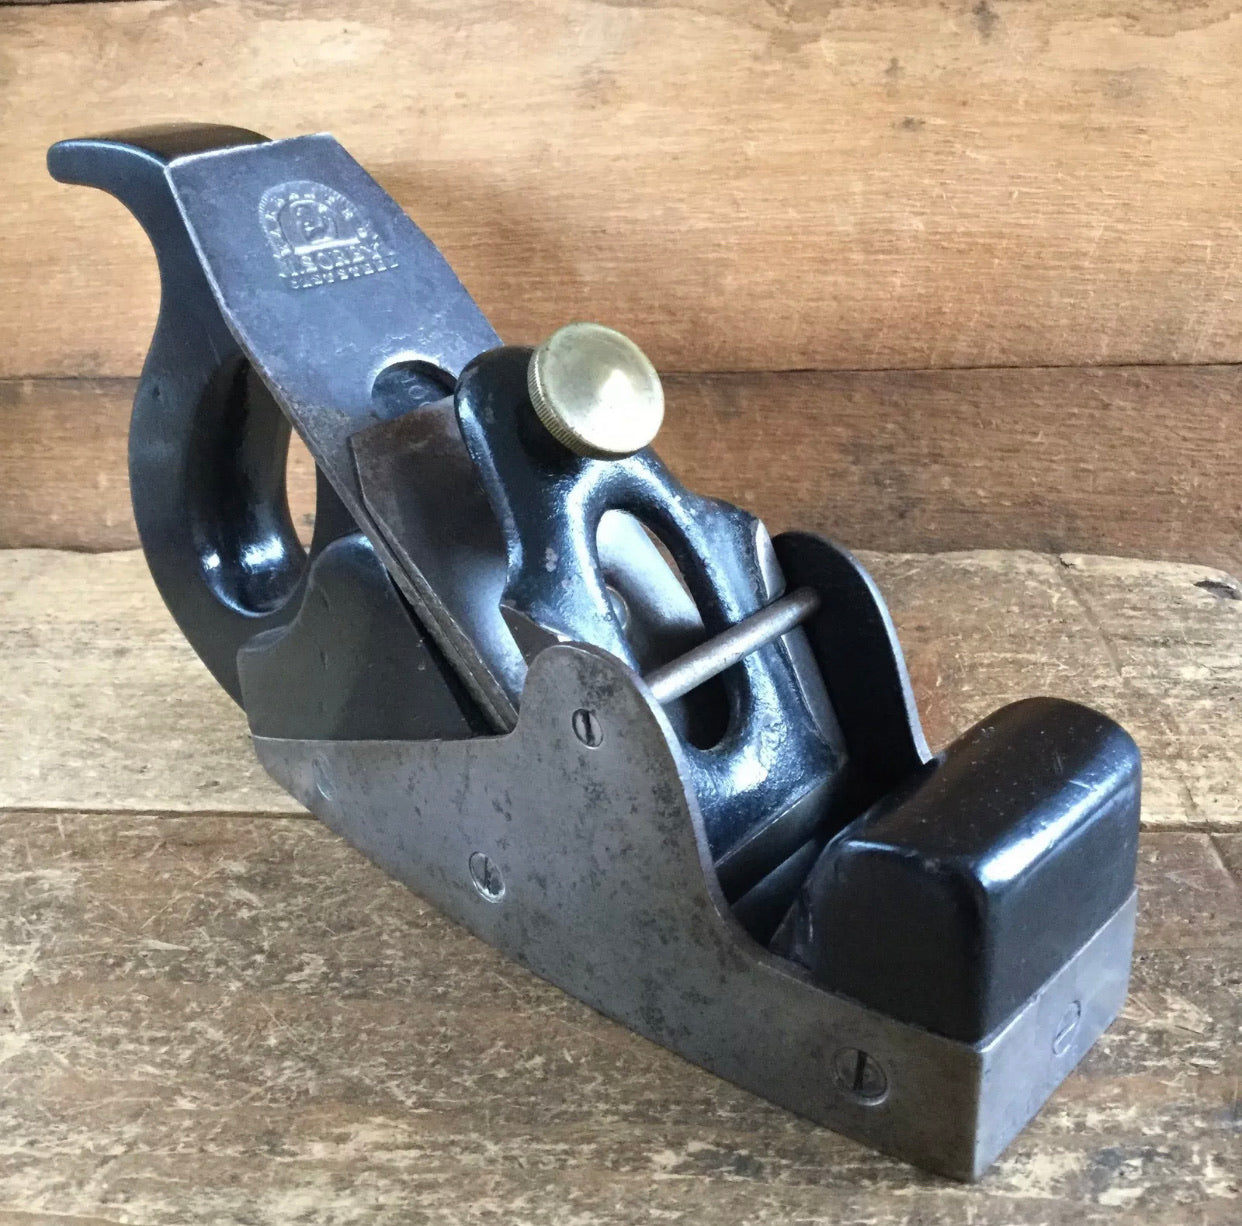 RARE Antique PRESTON PATENTED Infill Smoothing PLANE